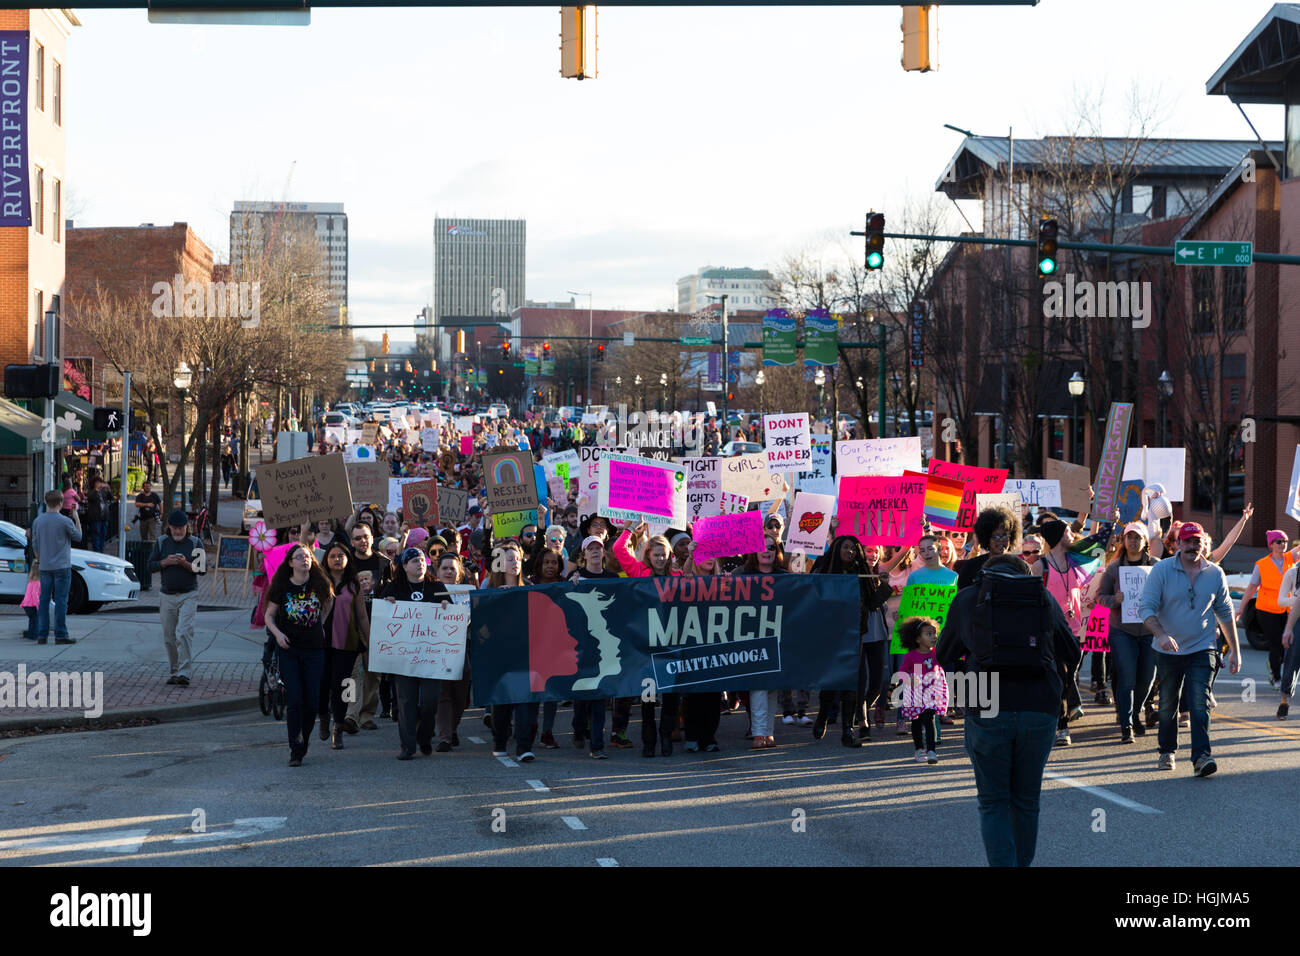 Chattanooga, Tennessee, USA. 21st January, 2017. Demonstrators march through the city holding feminist and anti-Trump signs as part of Women's March, Chattanooga. Credit: TDP Photography/Alamy Live News Stock Photo